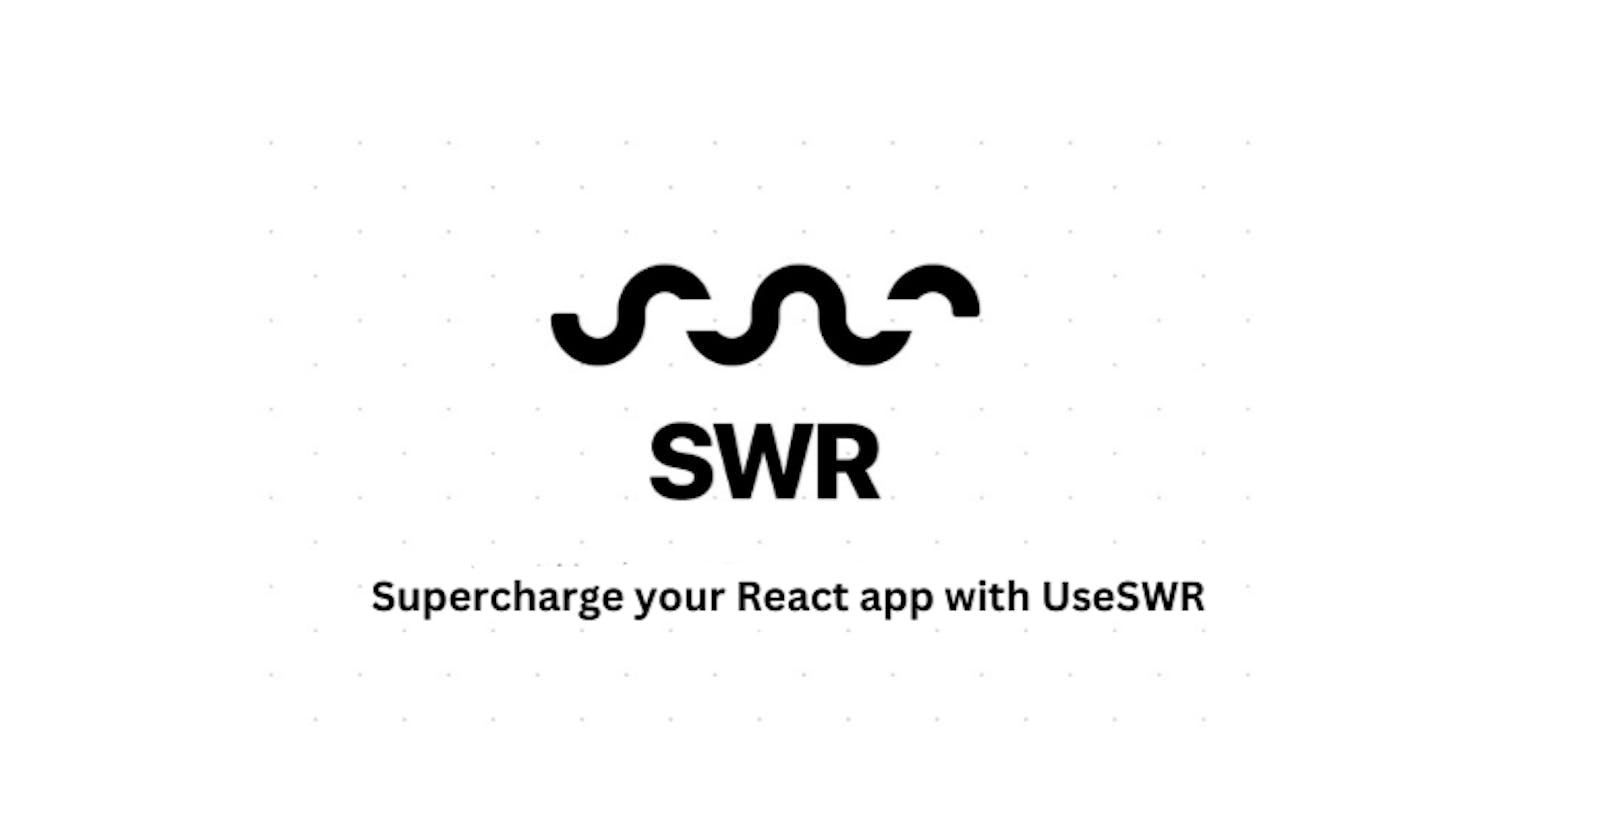 Supercharge your React app with UseSWR